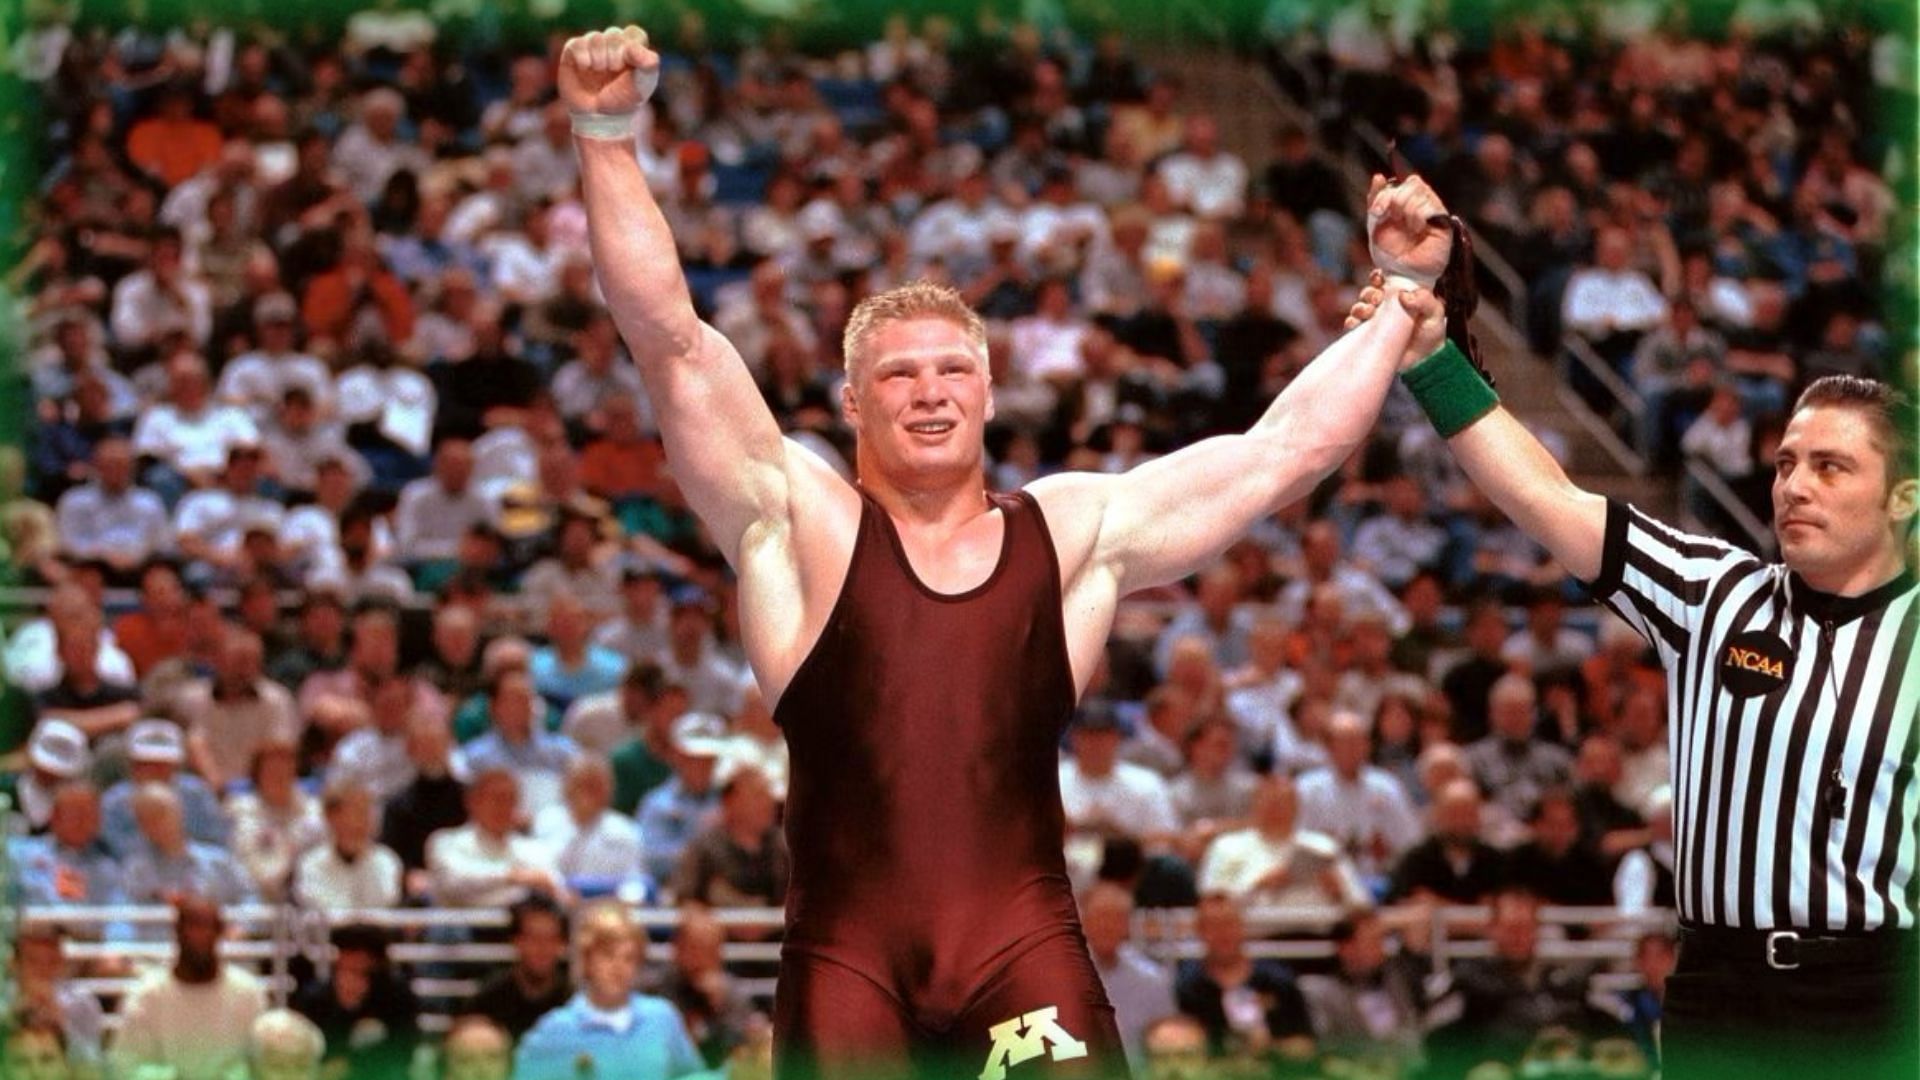 Brock Lesnar made his main roster debut on RAW in 2002